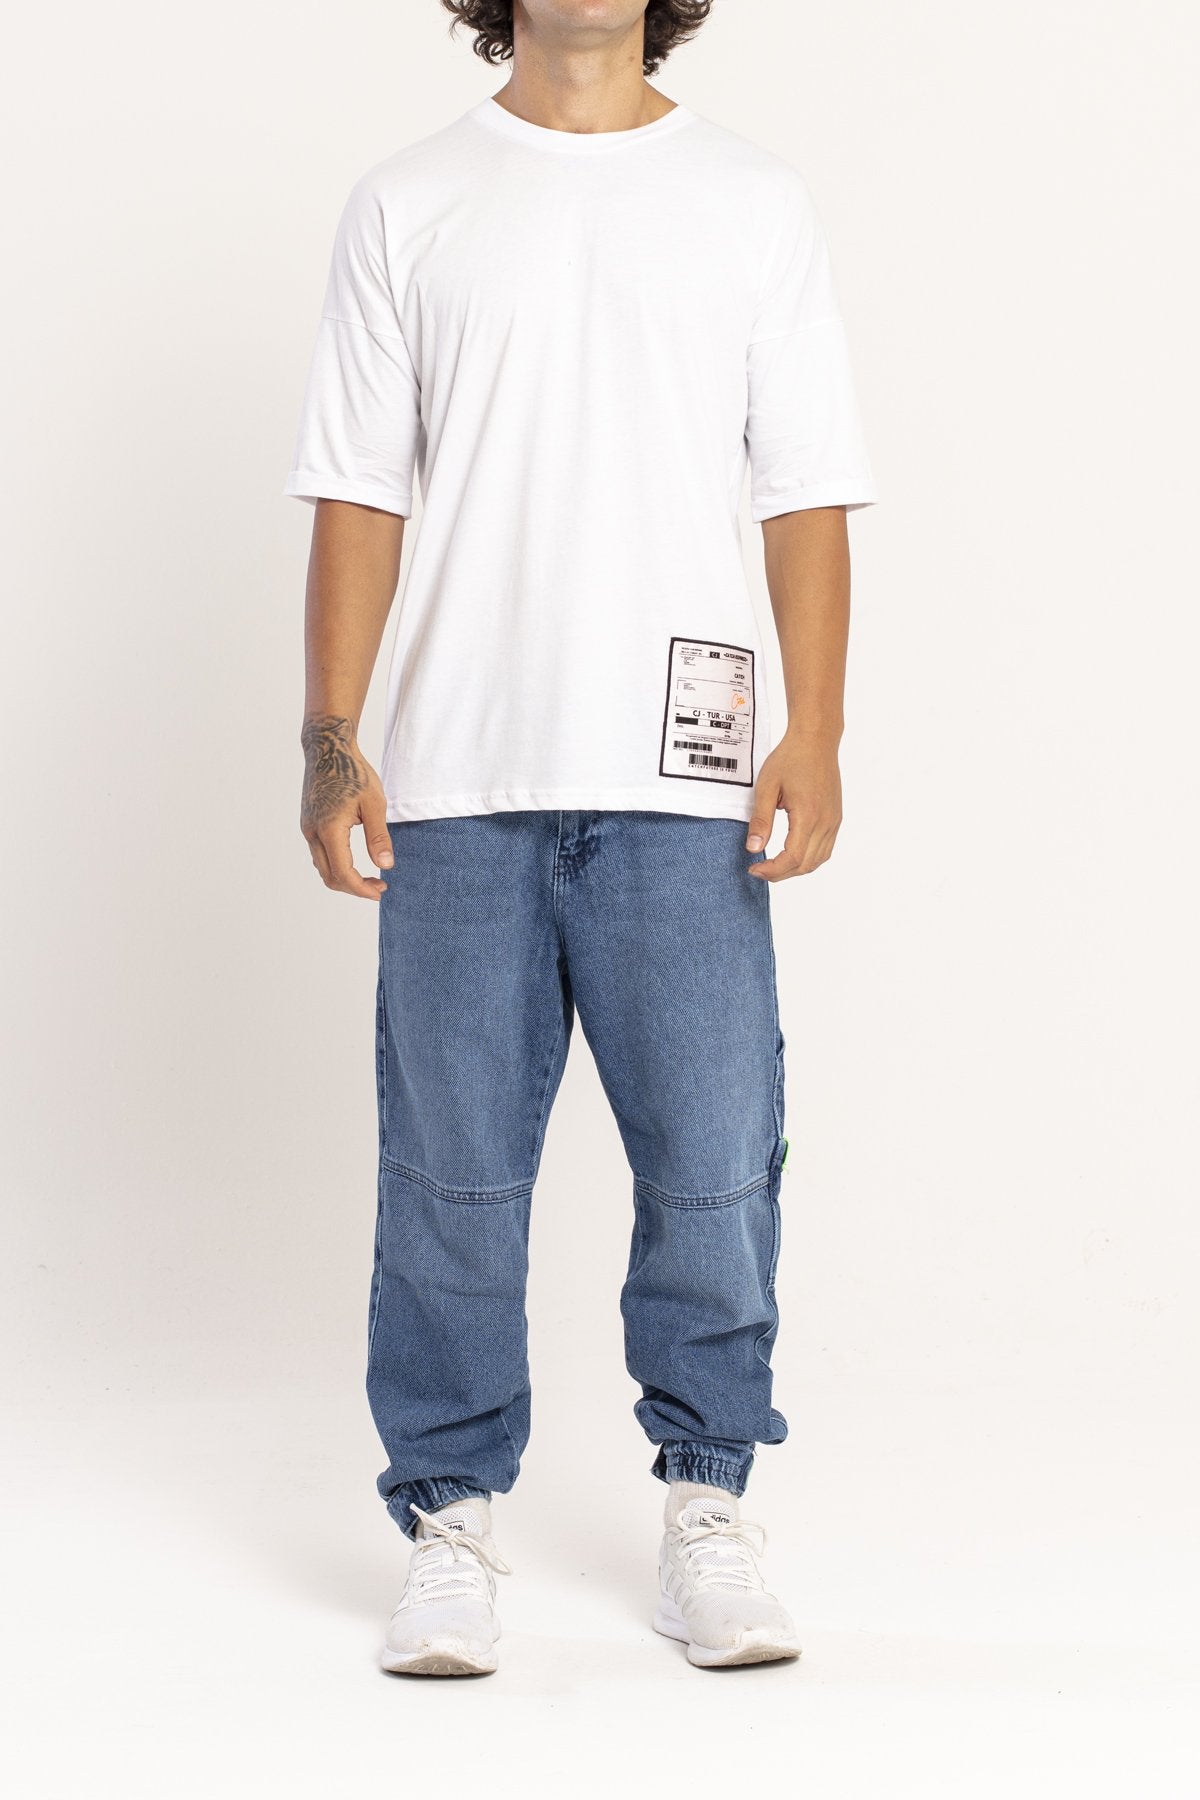 T-SHIRT OVERSIZE YOU ARE NOT - COLORE BIANCO